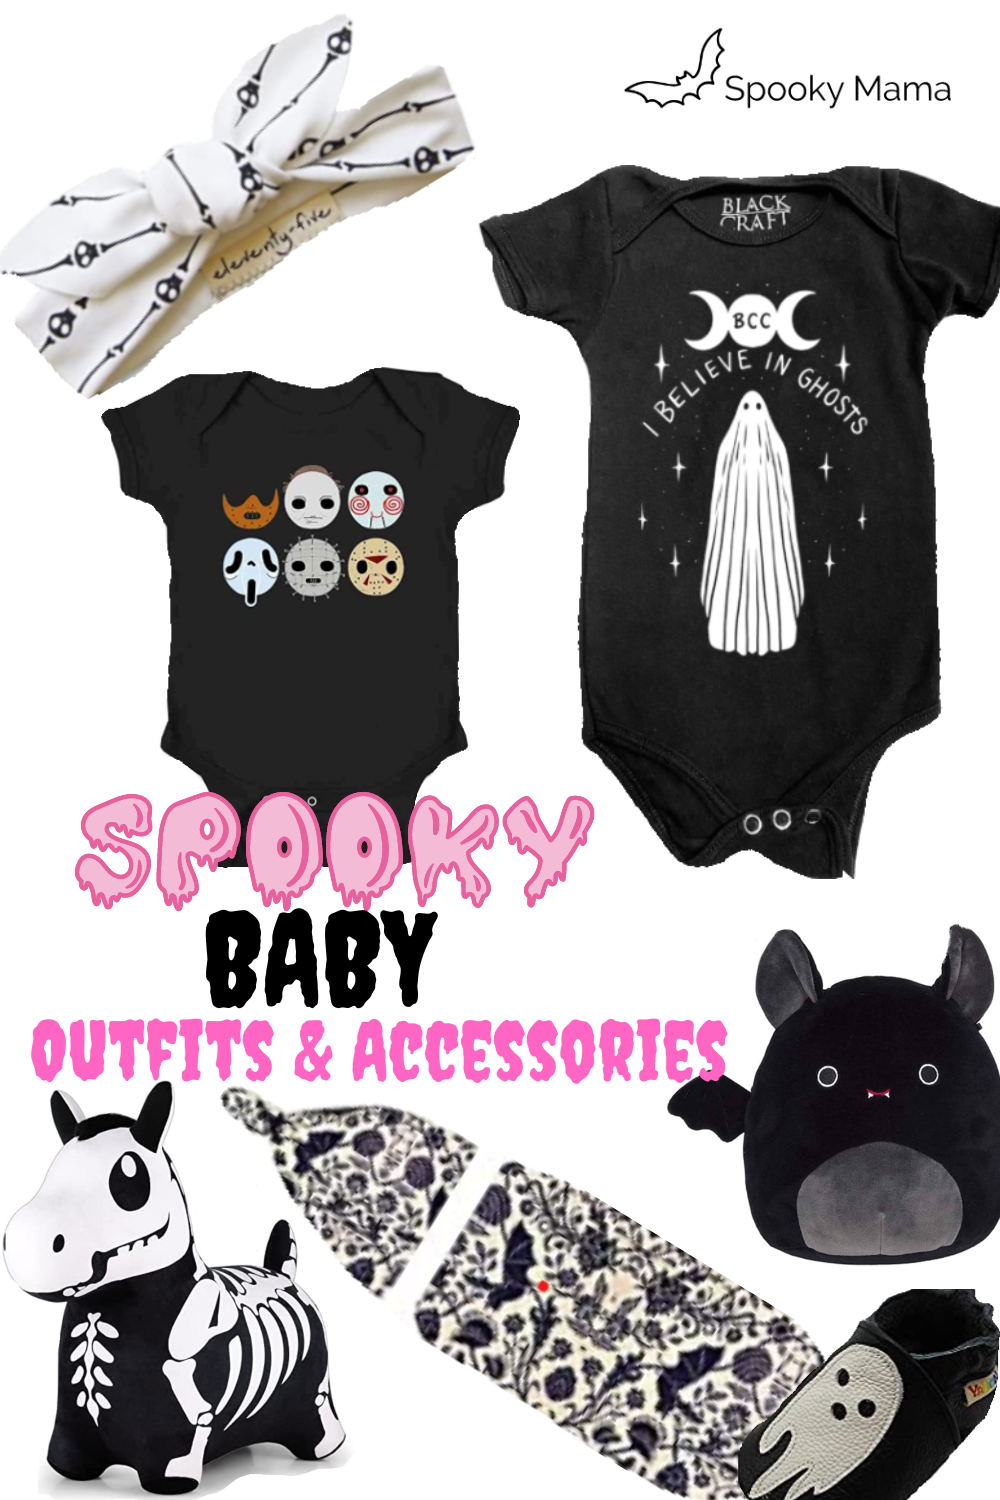 Spooky Baby Outfits and Accessories